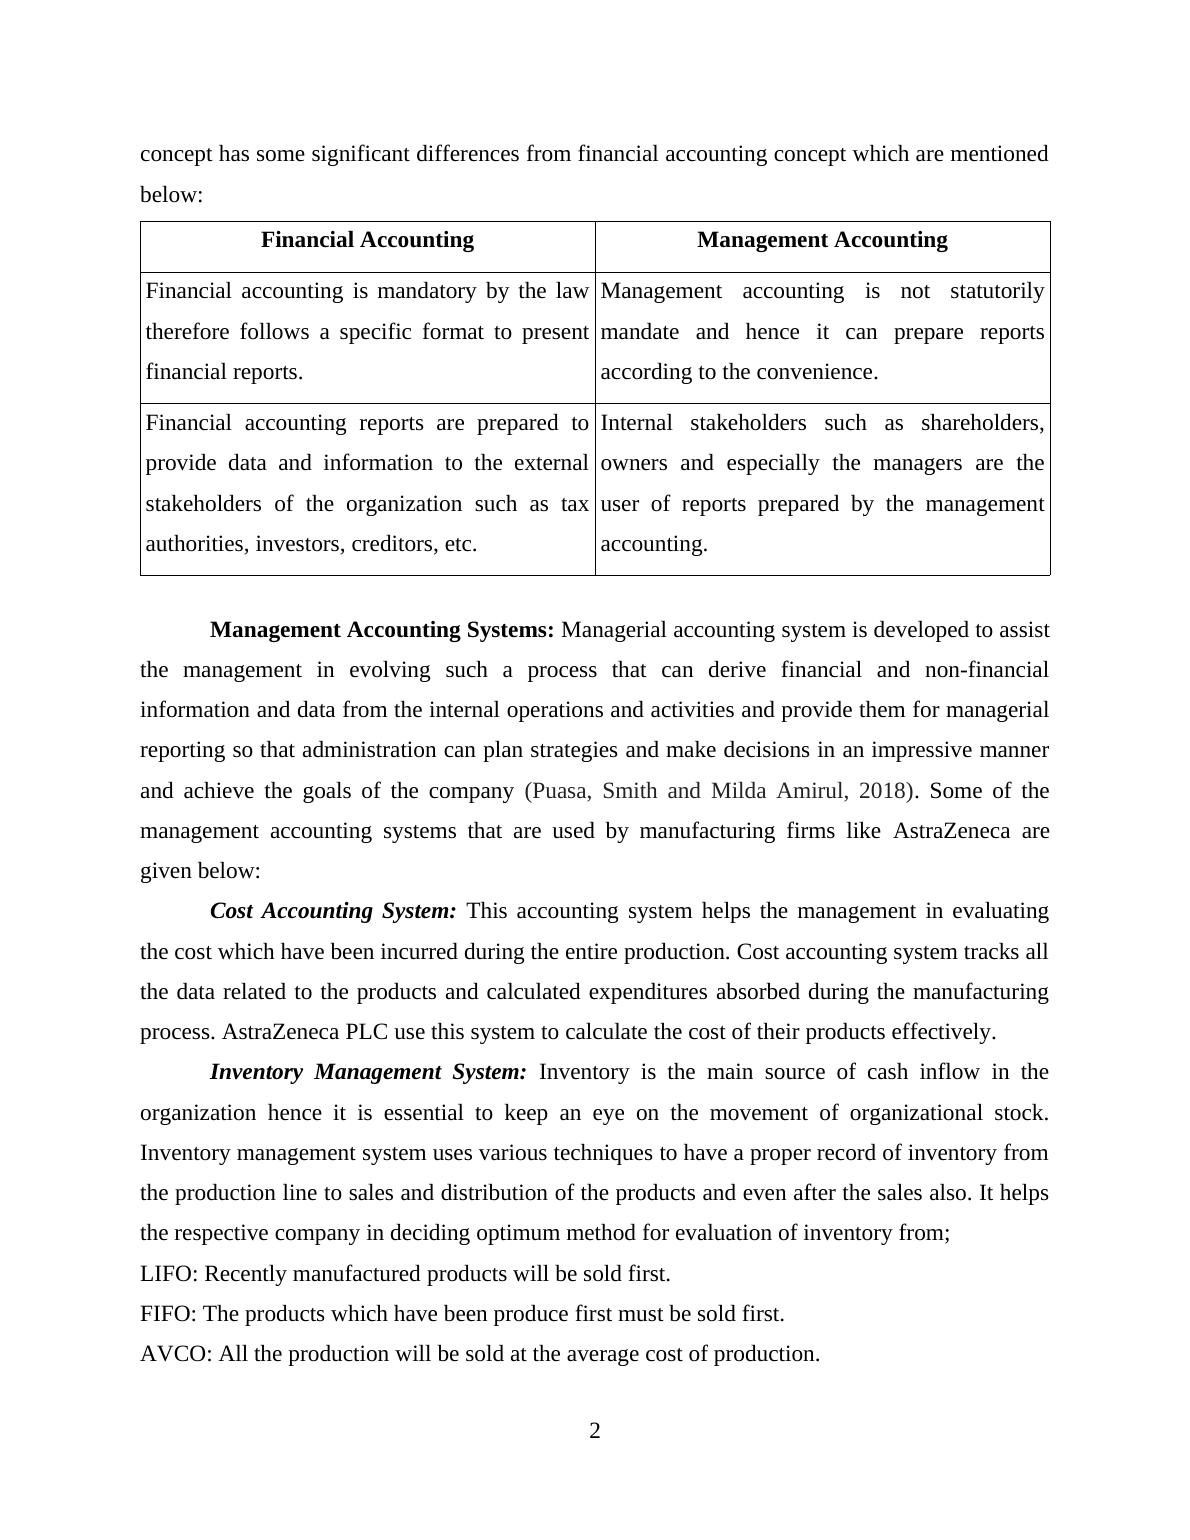 Management Accounting Process - Doc_4